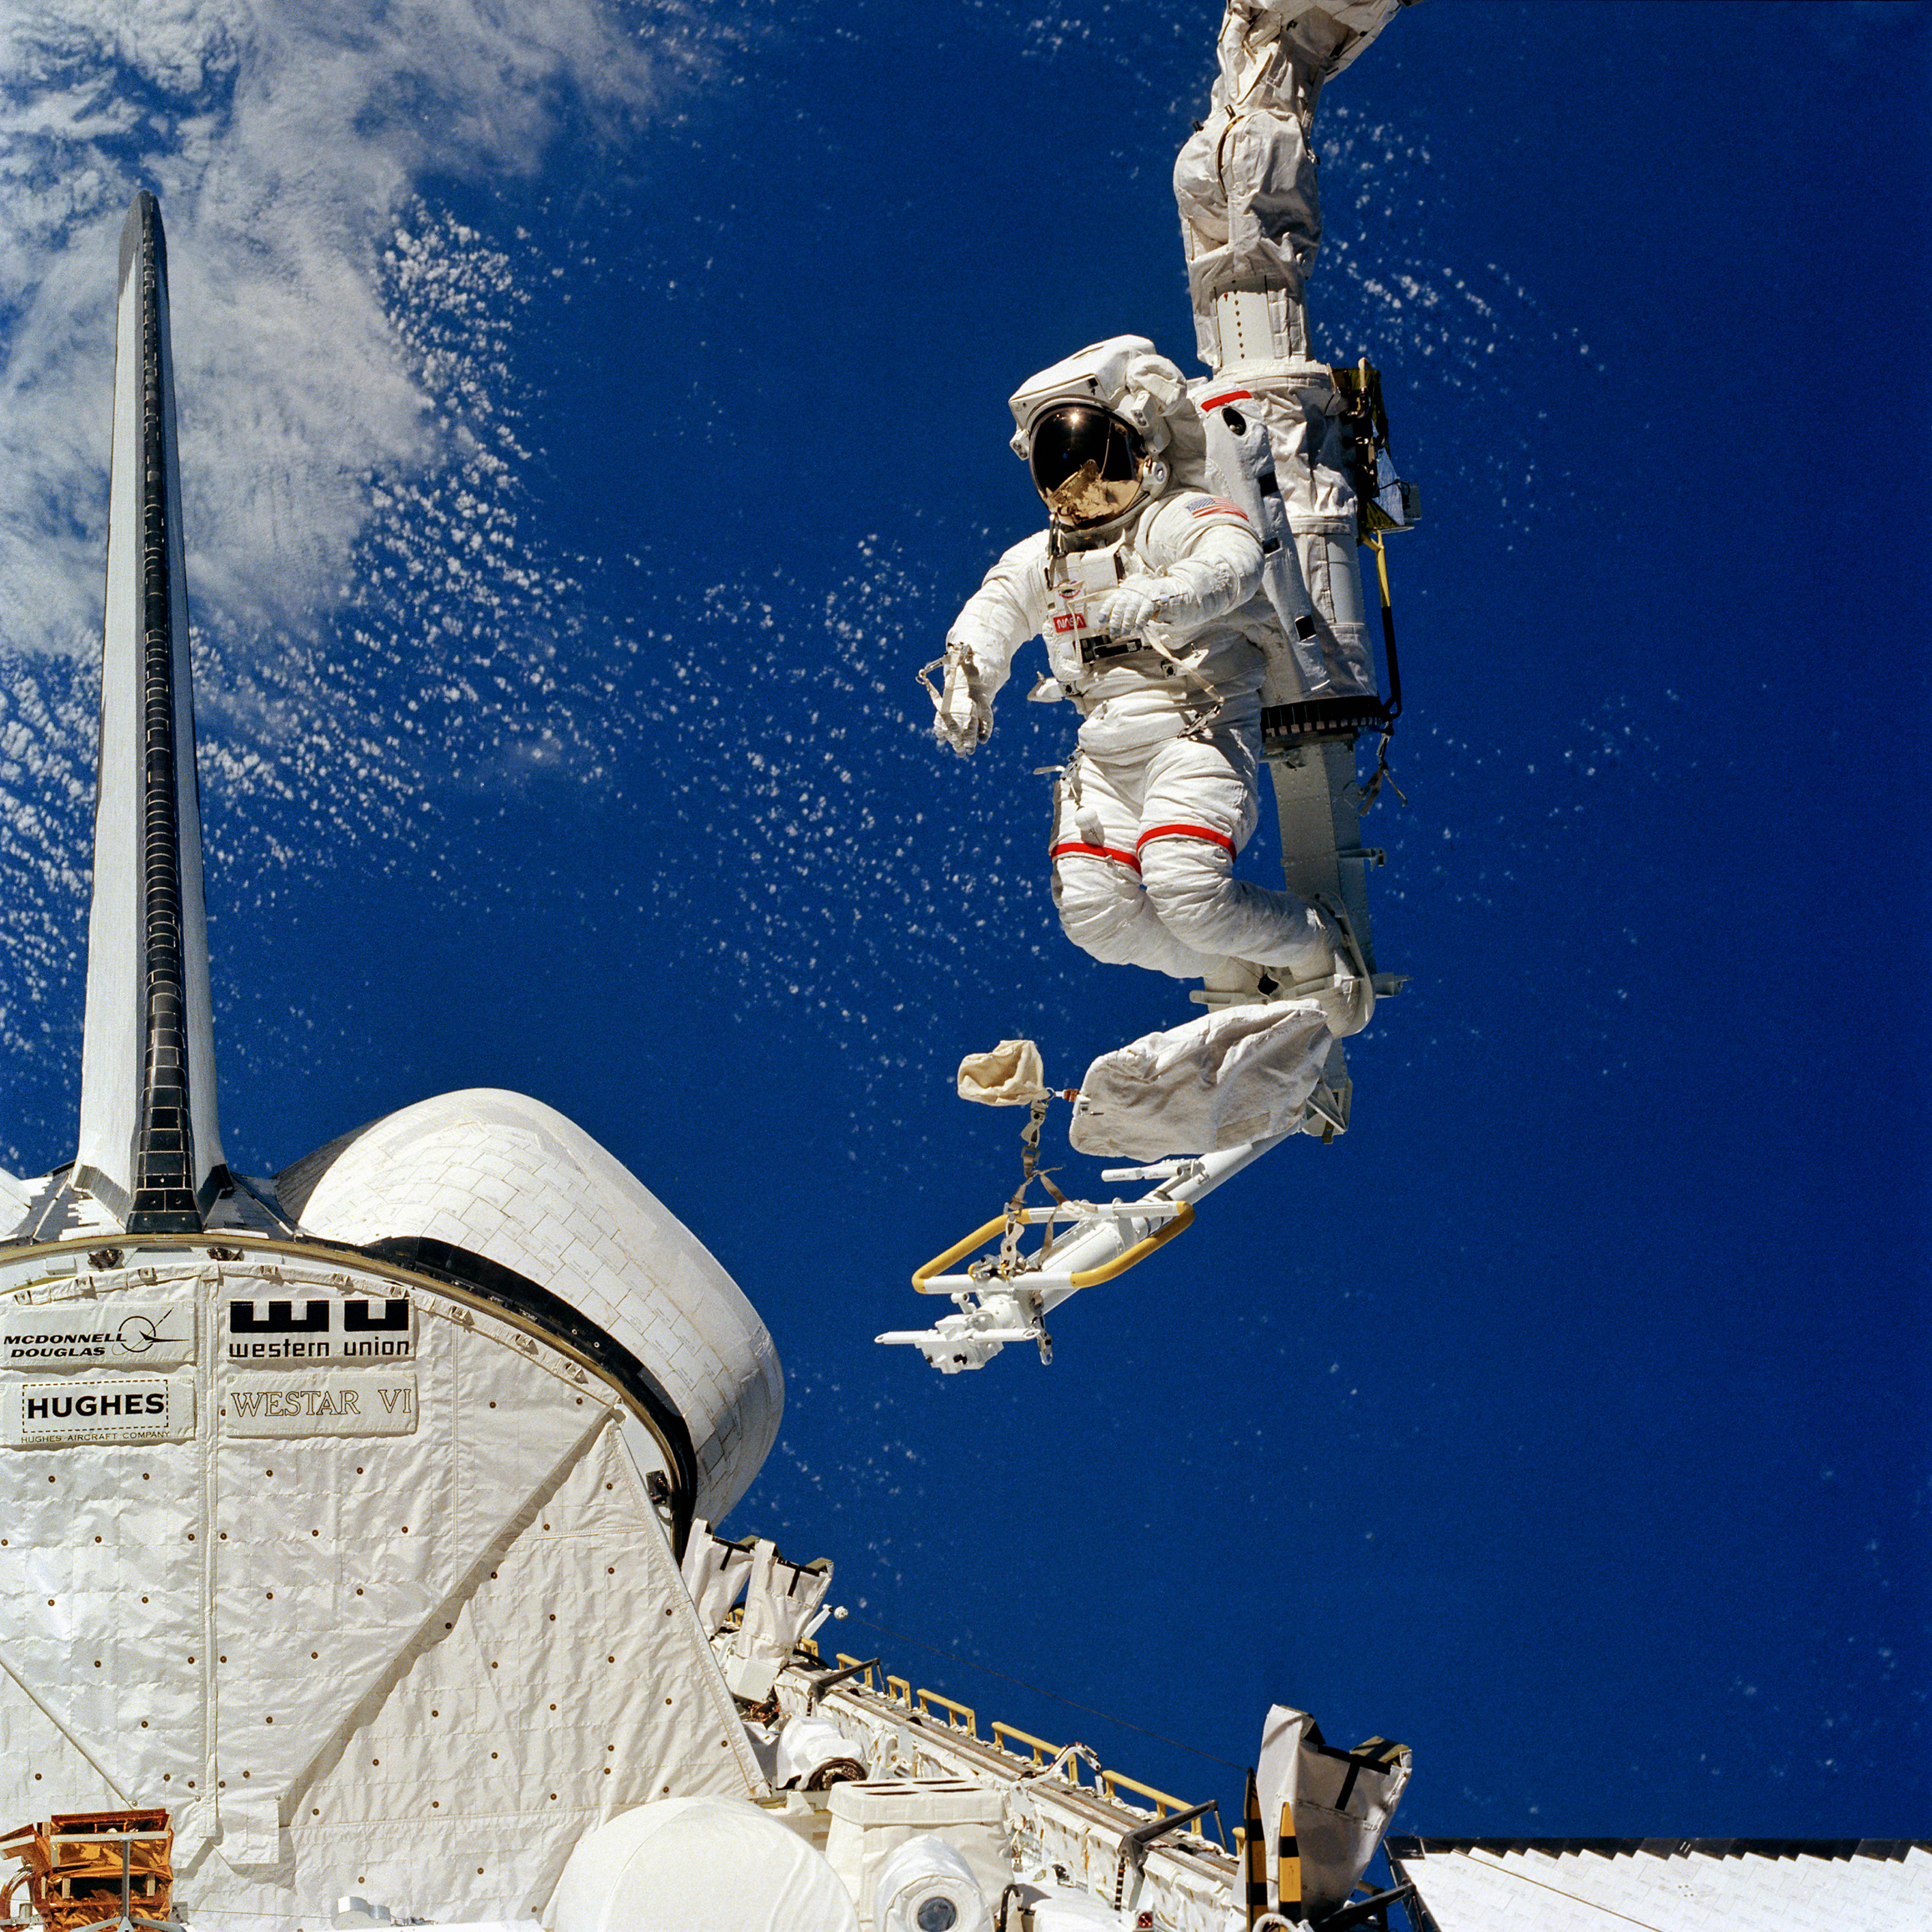 View of Bruce McCandless testing the Manipulator Foot Restraint at the end of the Remote Manipulator System, operated by Ronald E. McNair